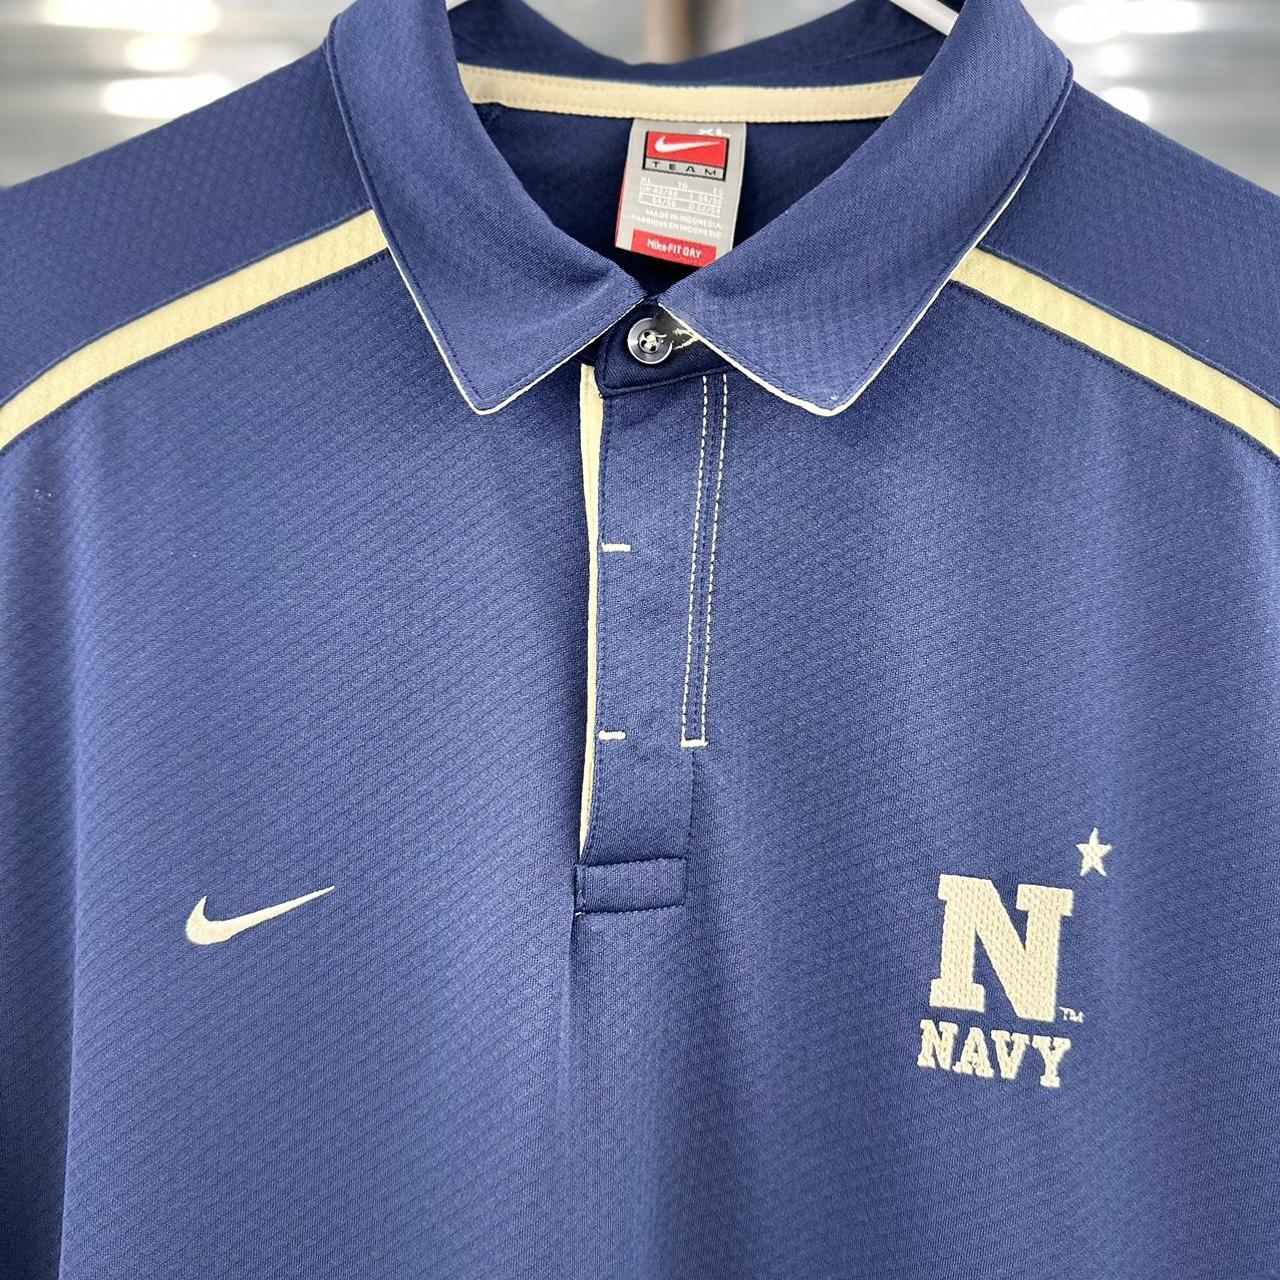 Nike Men's Navy and Gold Polo-shirts (2)